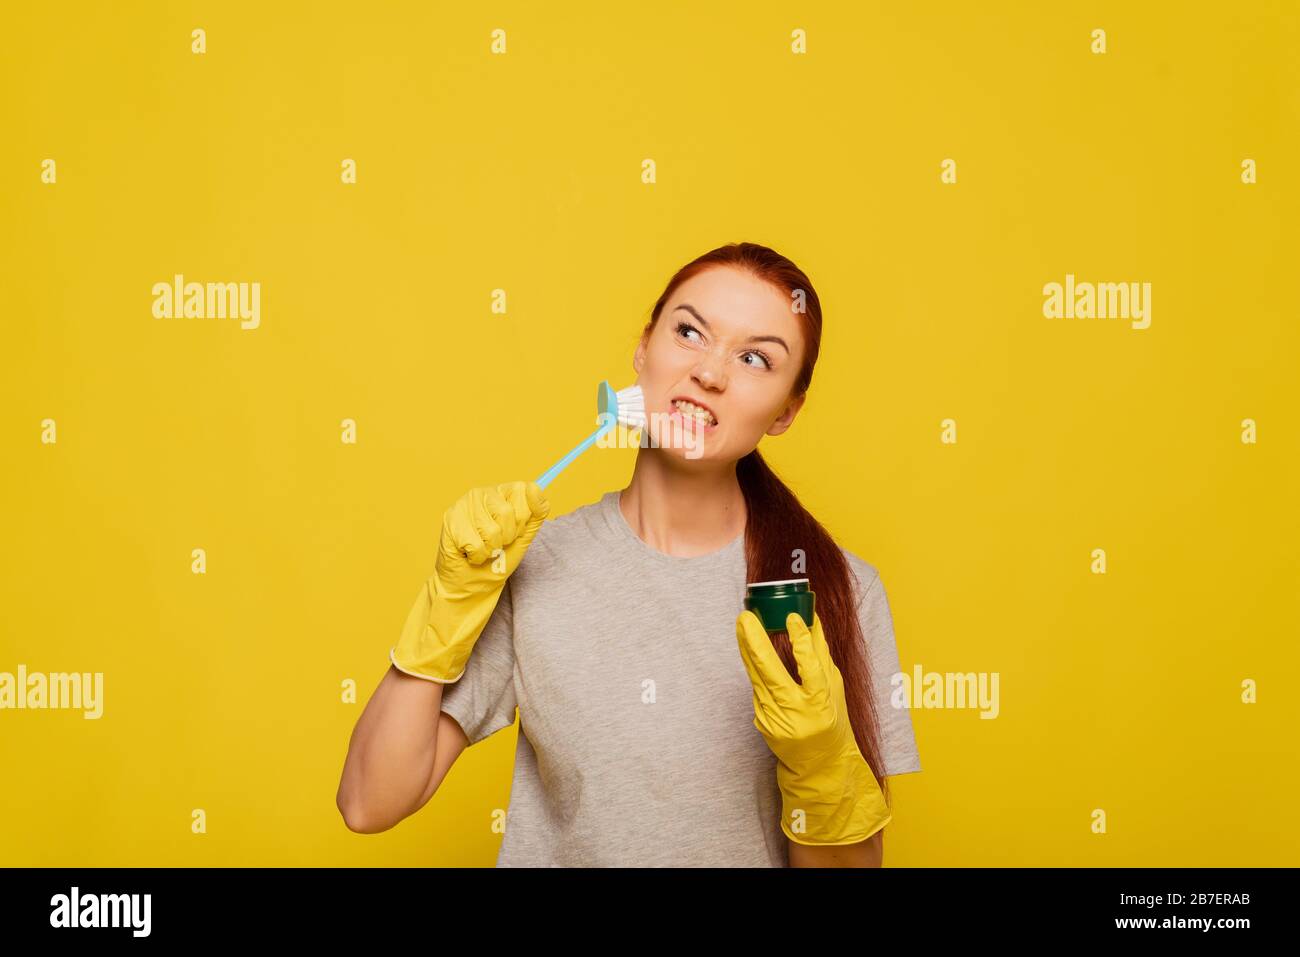 Beauty Face Skin Care. Closeup Young Woman In Yellow Gloves And Cleaning Brush In Hand Exfoliating Skin. Portrait Of Beautiful Healthy Girl With Natural Makeup Scrubbing Facial Skin. Stock Photo